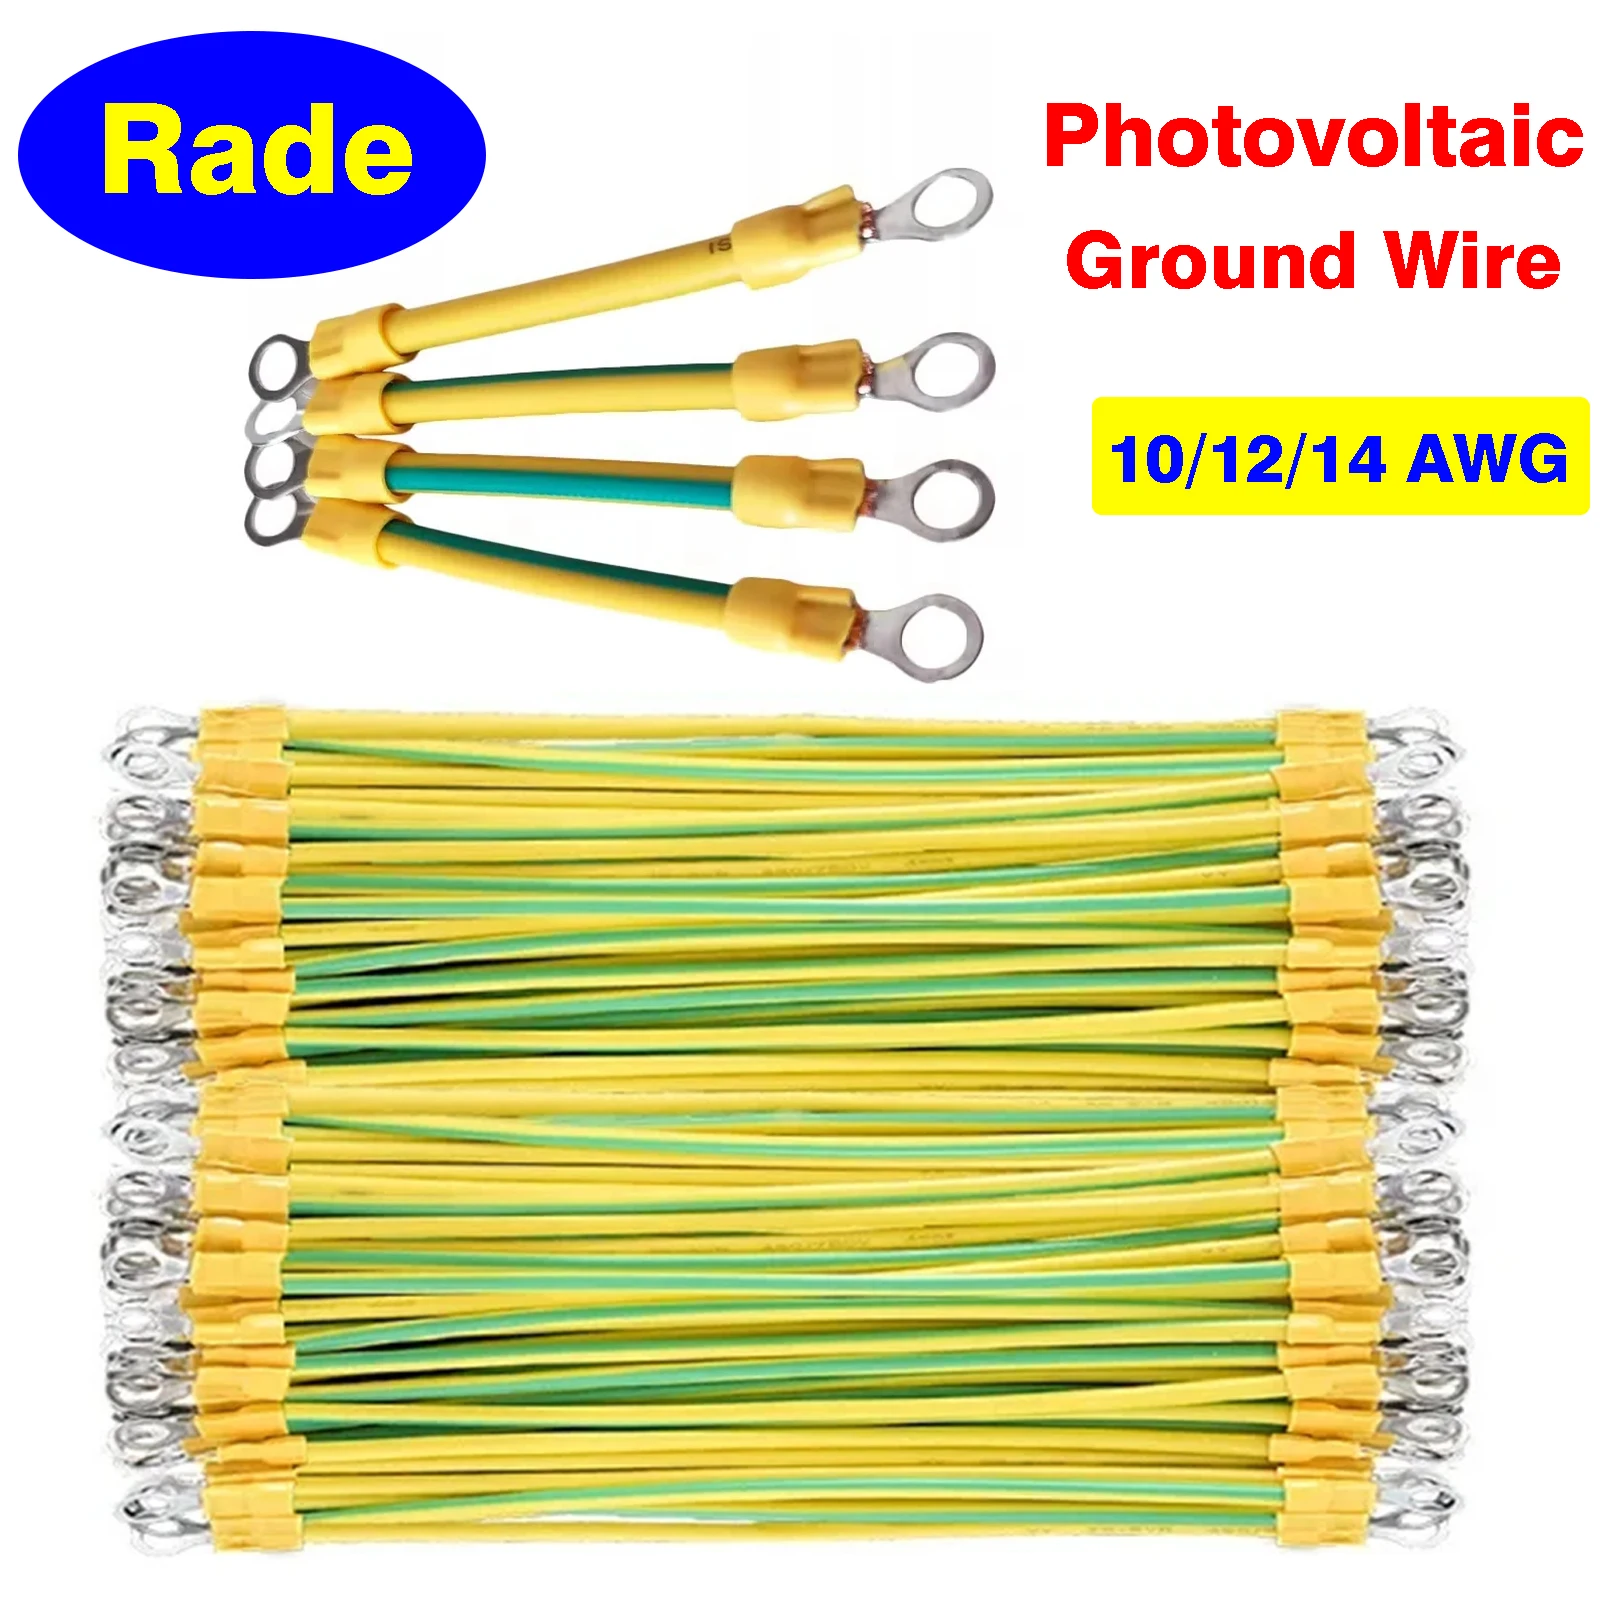 

Solar Photovoltaic PV Panel Grounding Wire 10/12/14 AWG Yellow Green Copper PV Cabinet Bridge Leakage Earth Cable 2.5 4 6 mm2